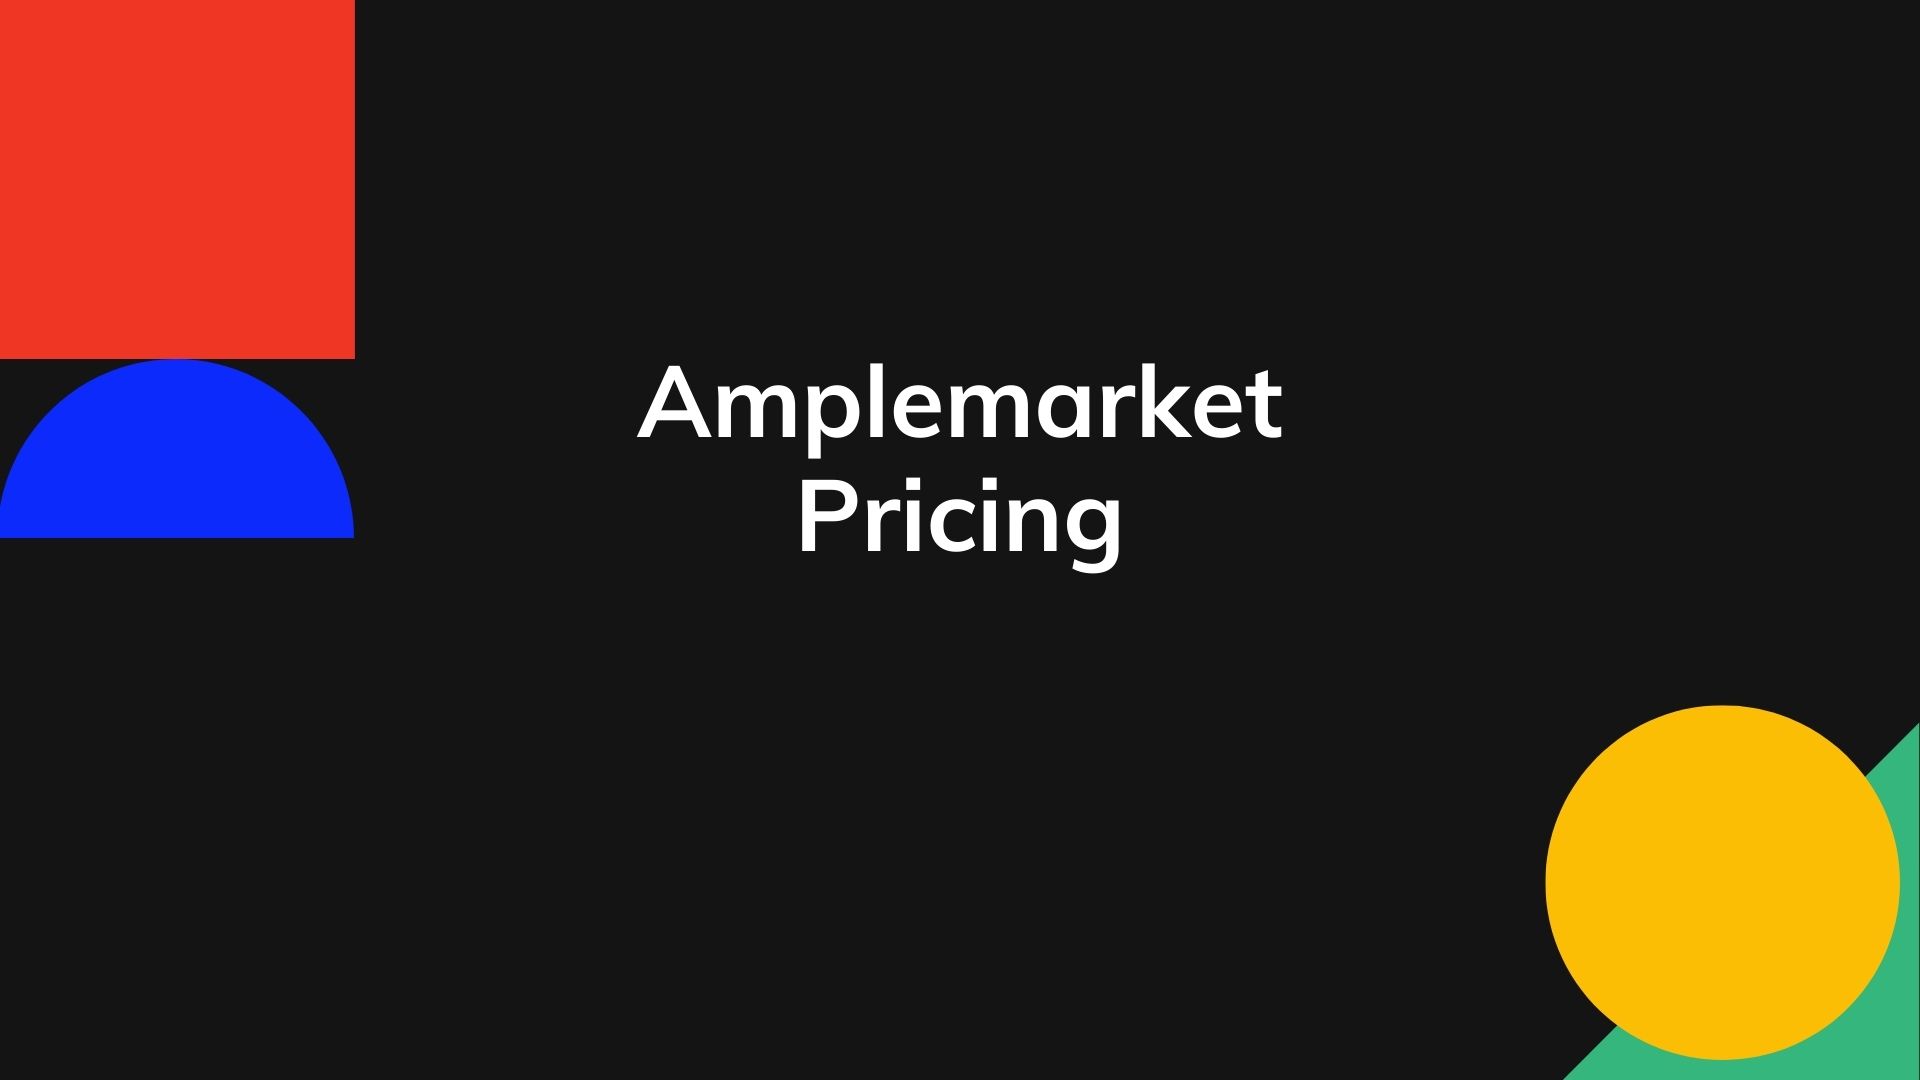 Amplemarket Pricing